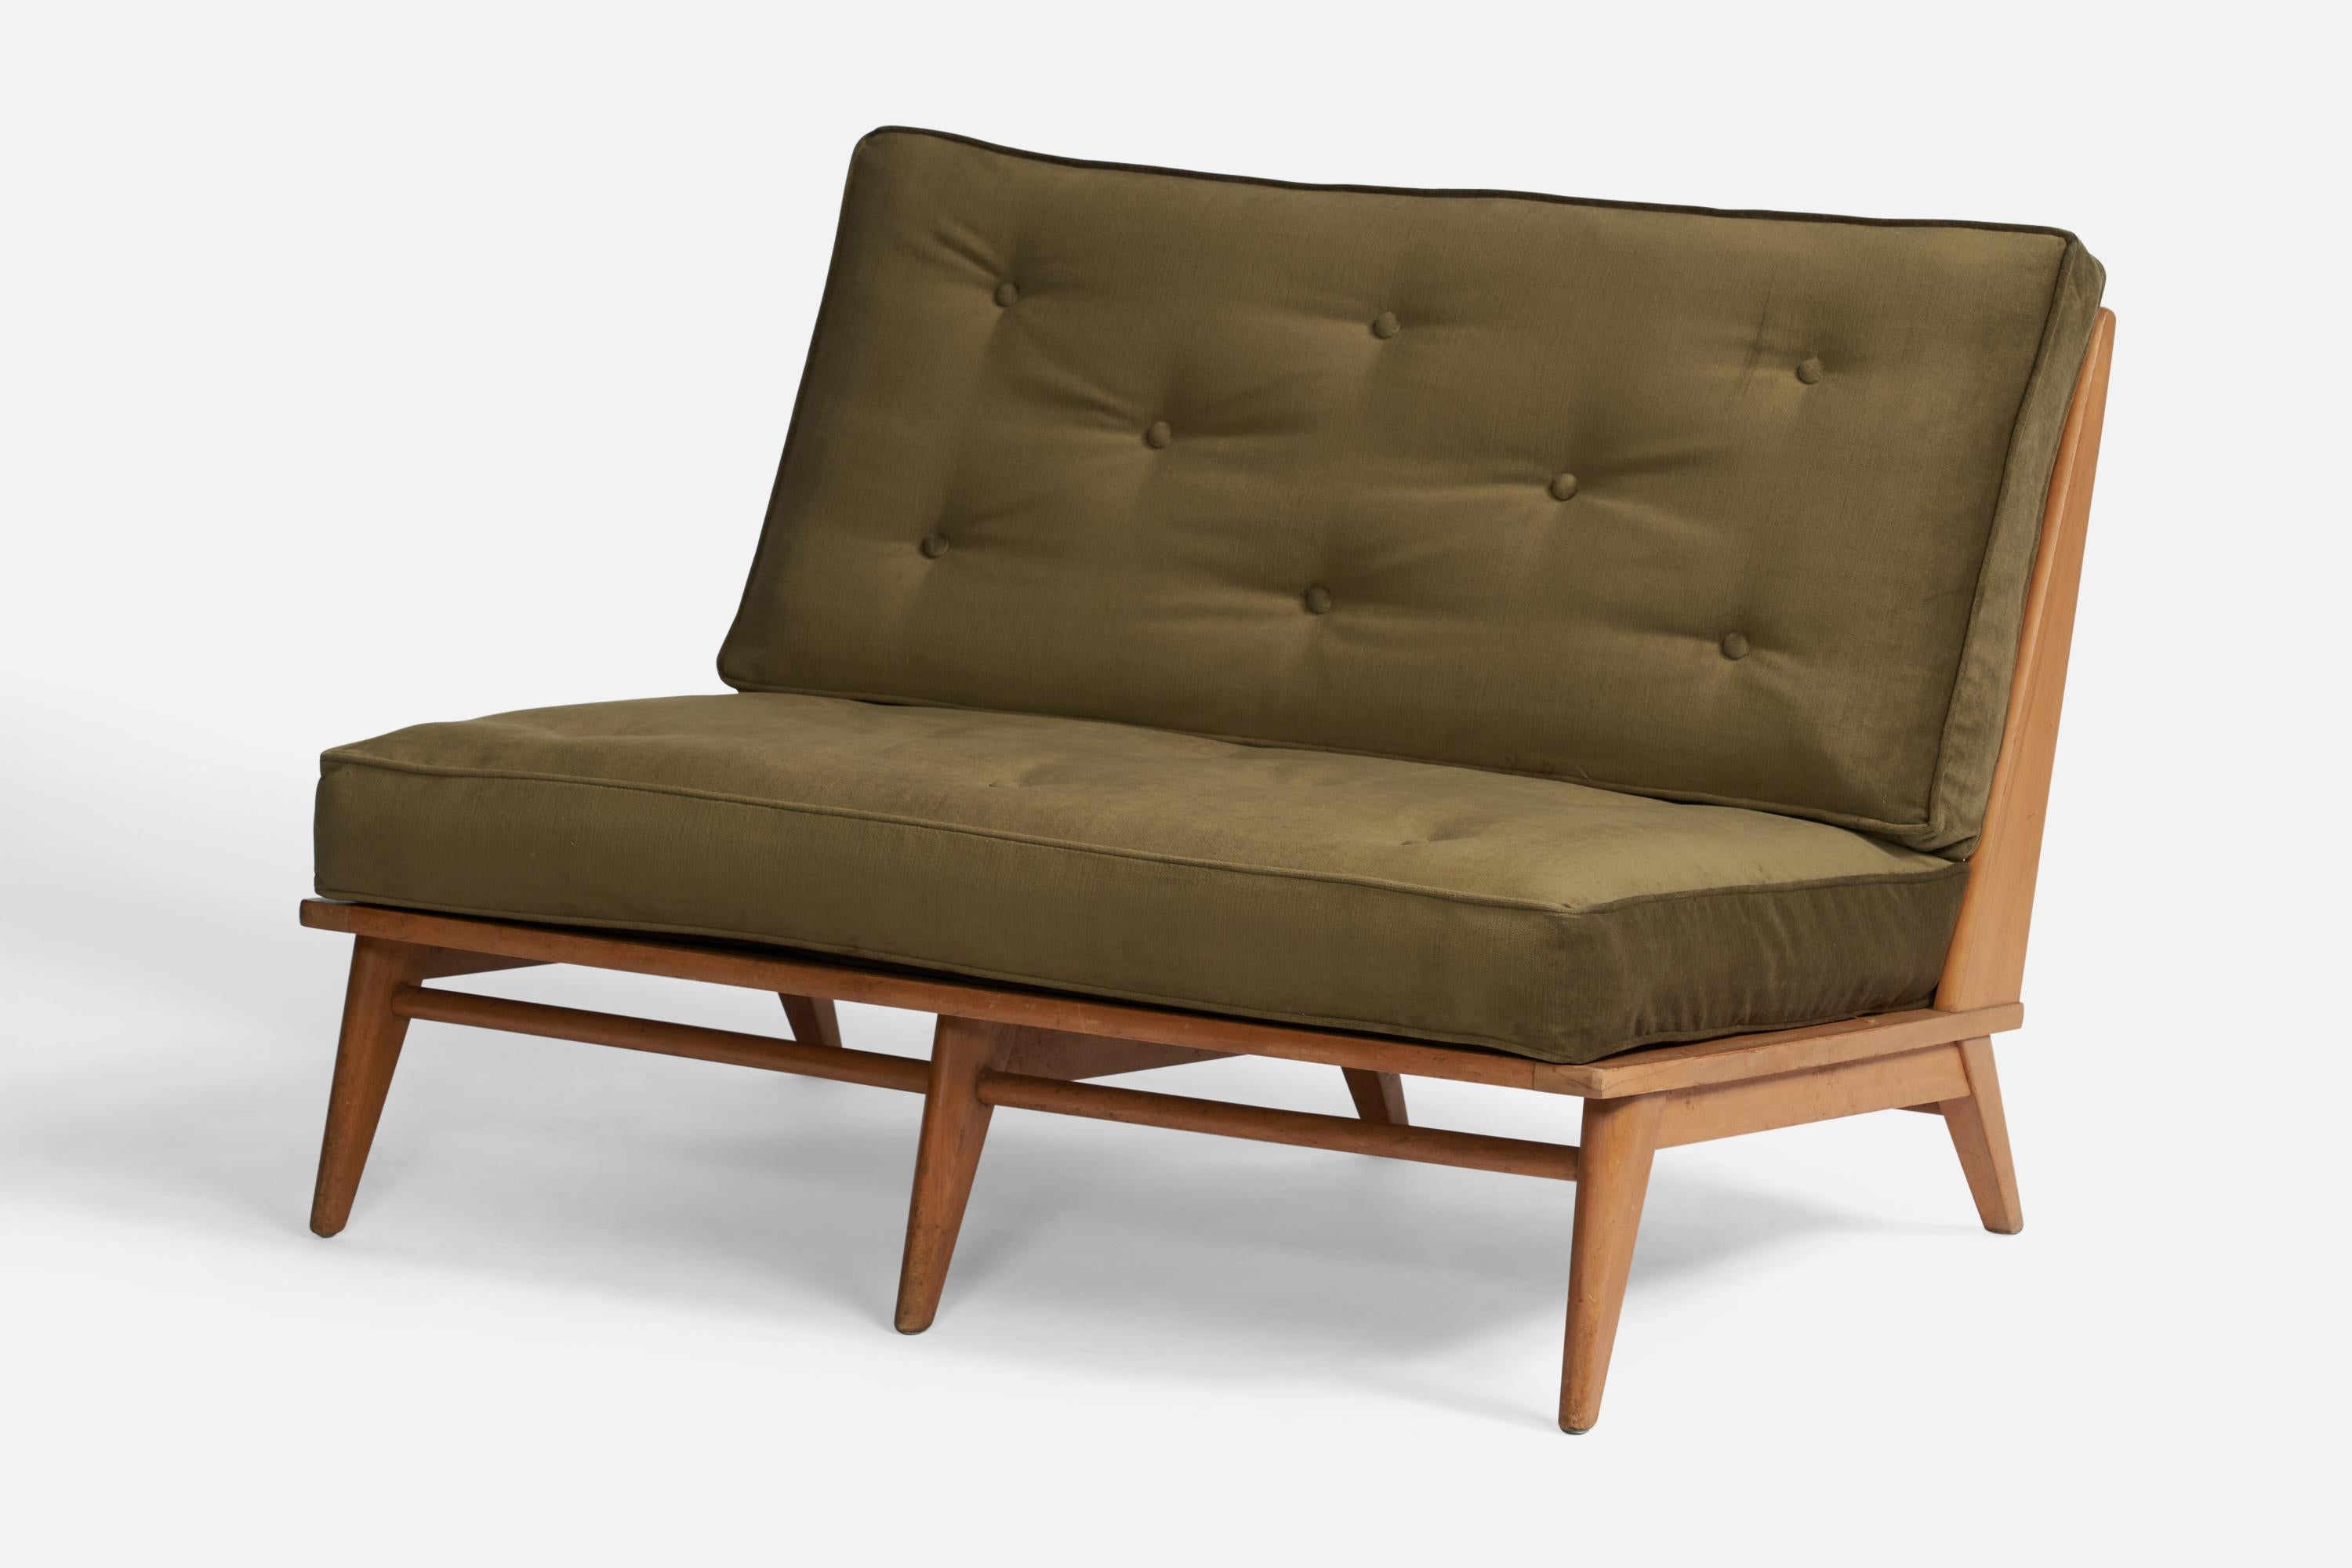 A maple and green velvet fabric settee designed and produced by Heywood Wakefield, USA, 1950s.

Seat height 16”